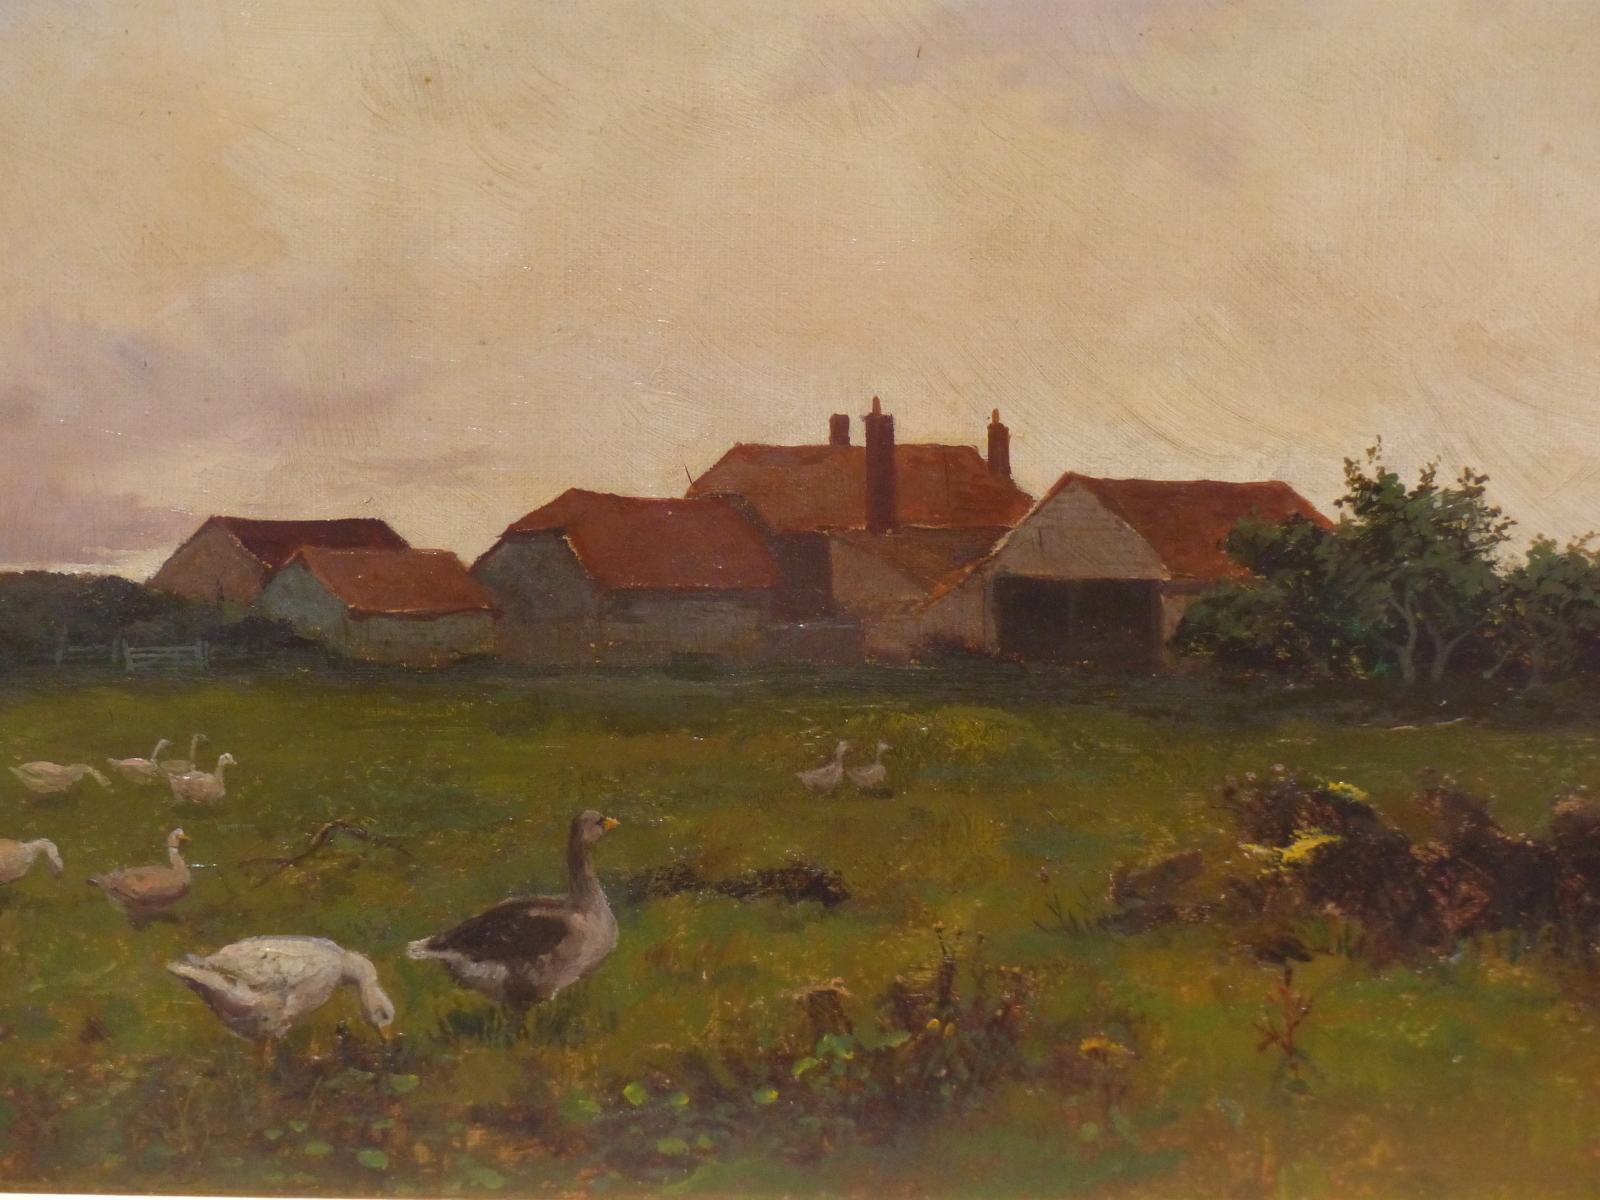 WILL ANDERSON (19TH/20TH CENTURY), GEESE BY A FARM IN AN EXTENSIVE LANDSCAPE, SIGNED LOWER RIGHT,